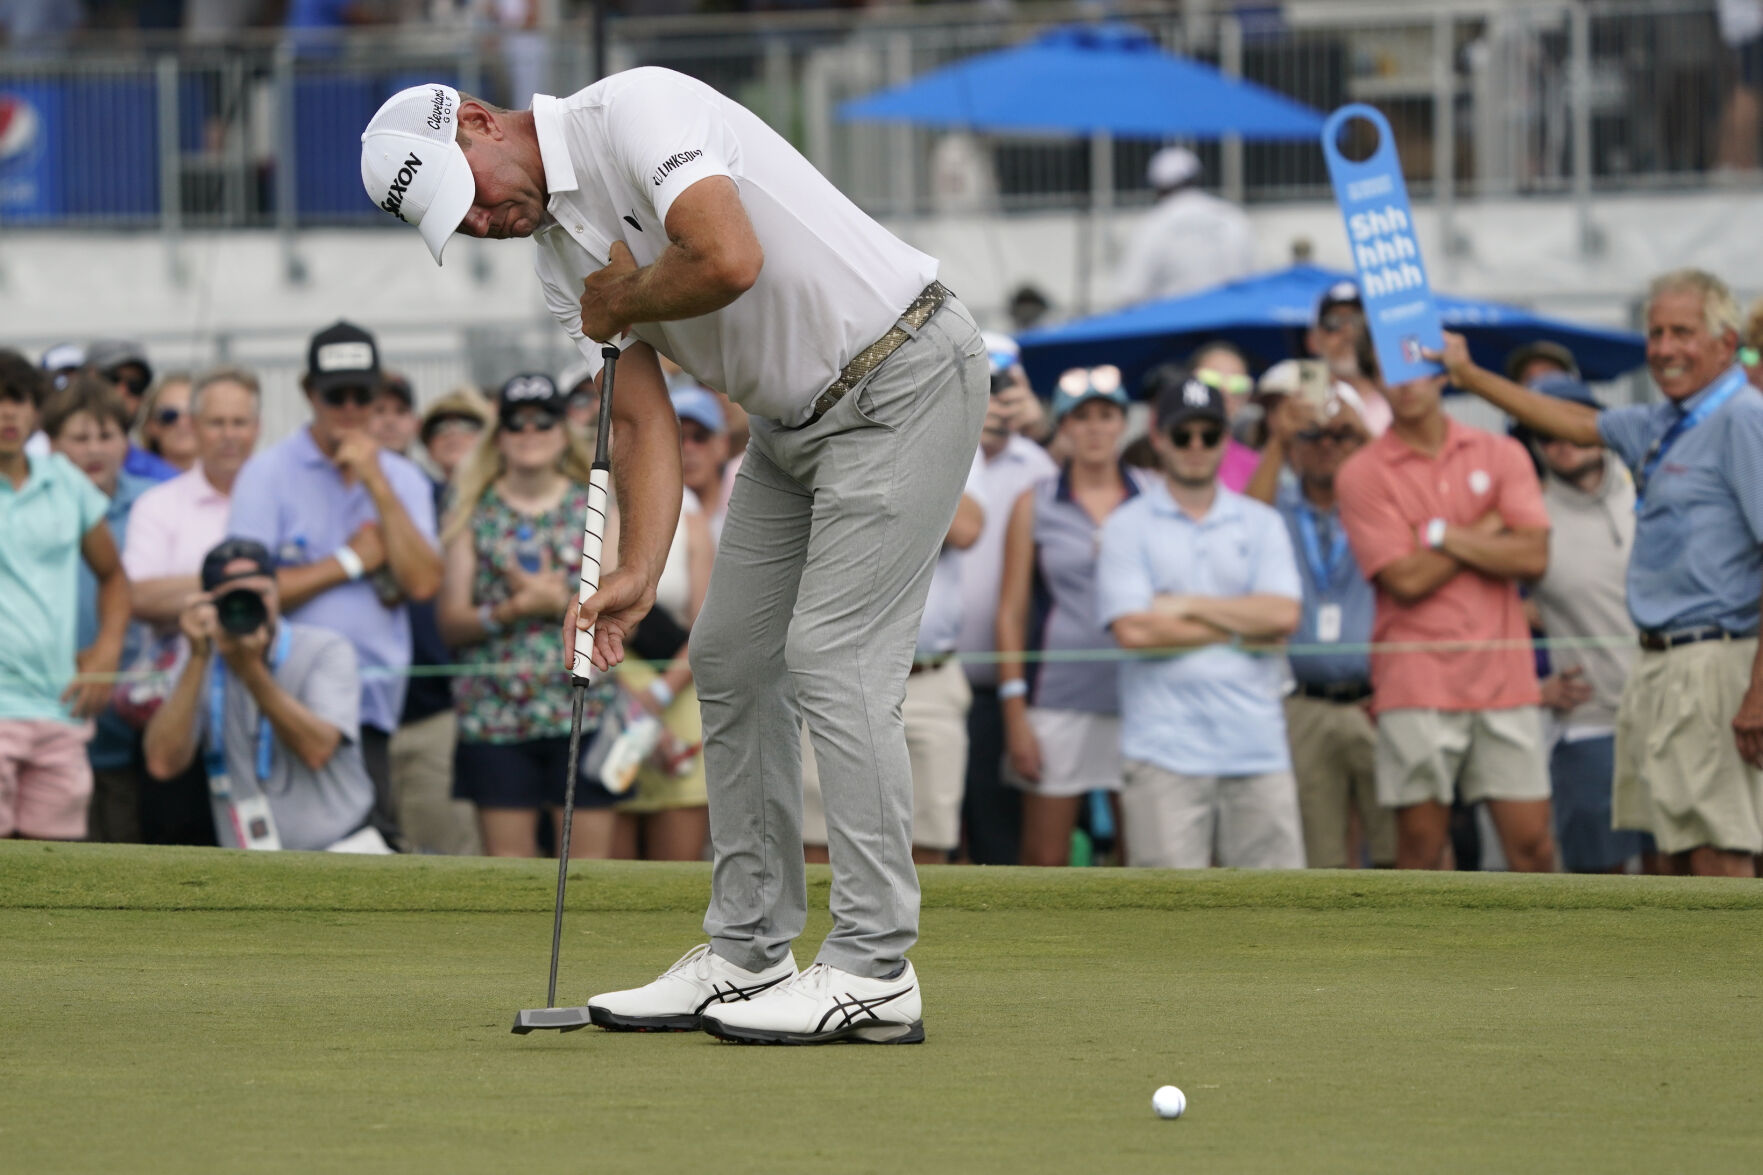 Wyndham Championship Purse: How Much Does the Winner Make?